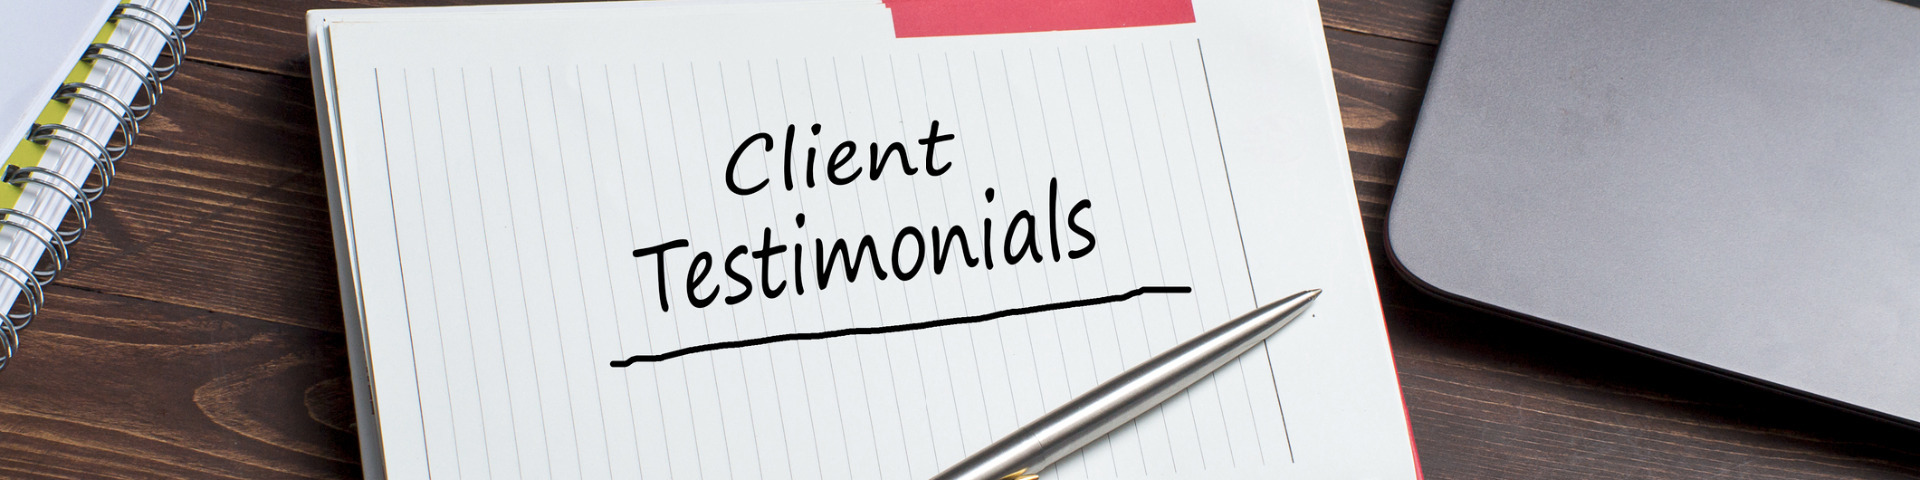 Note pad with clients testimonials written across the page